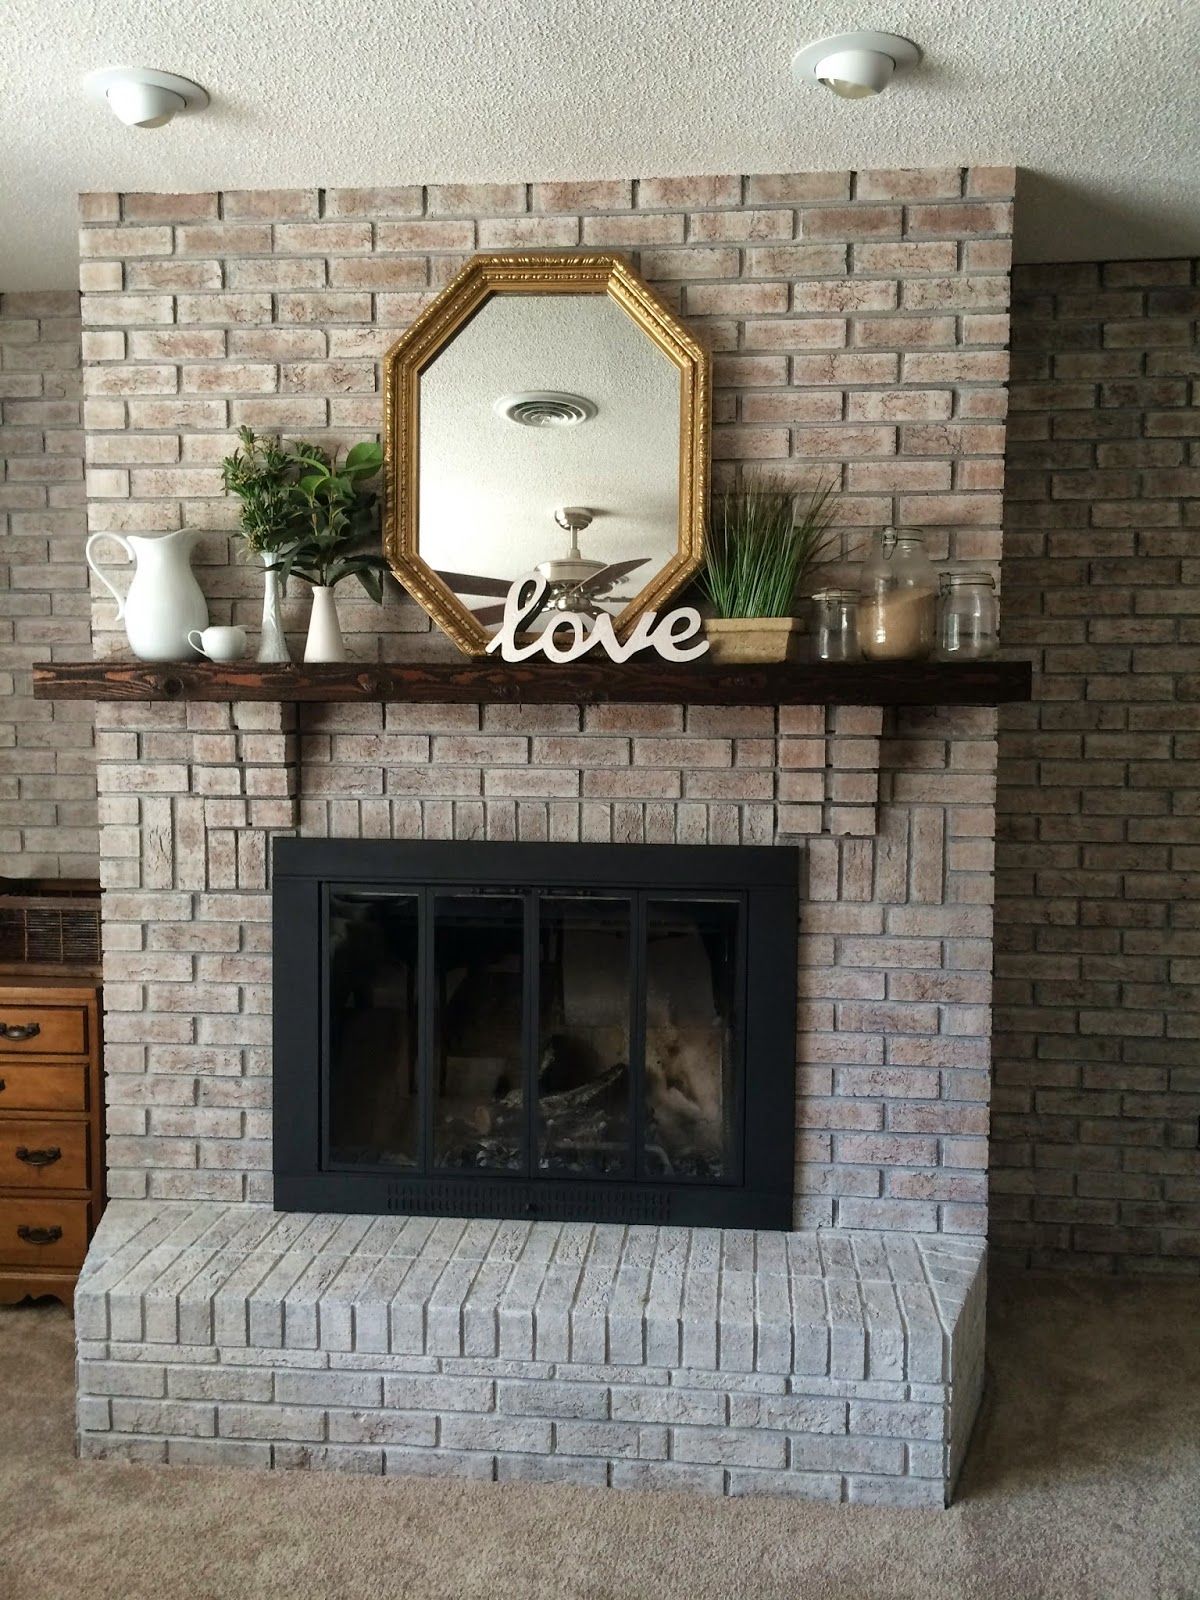 Fireplace Cover Up Lovely White Washing Brick with Gray Beige Walking with Dancers